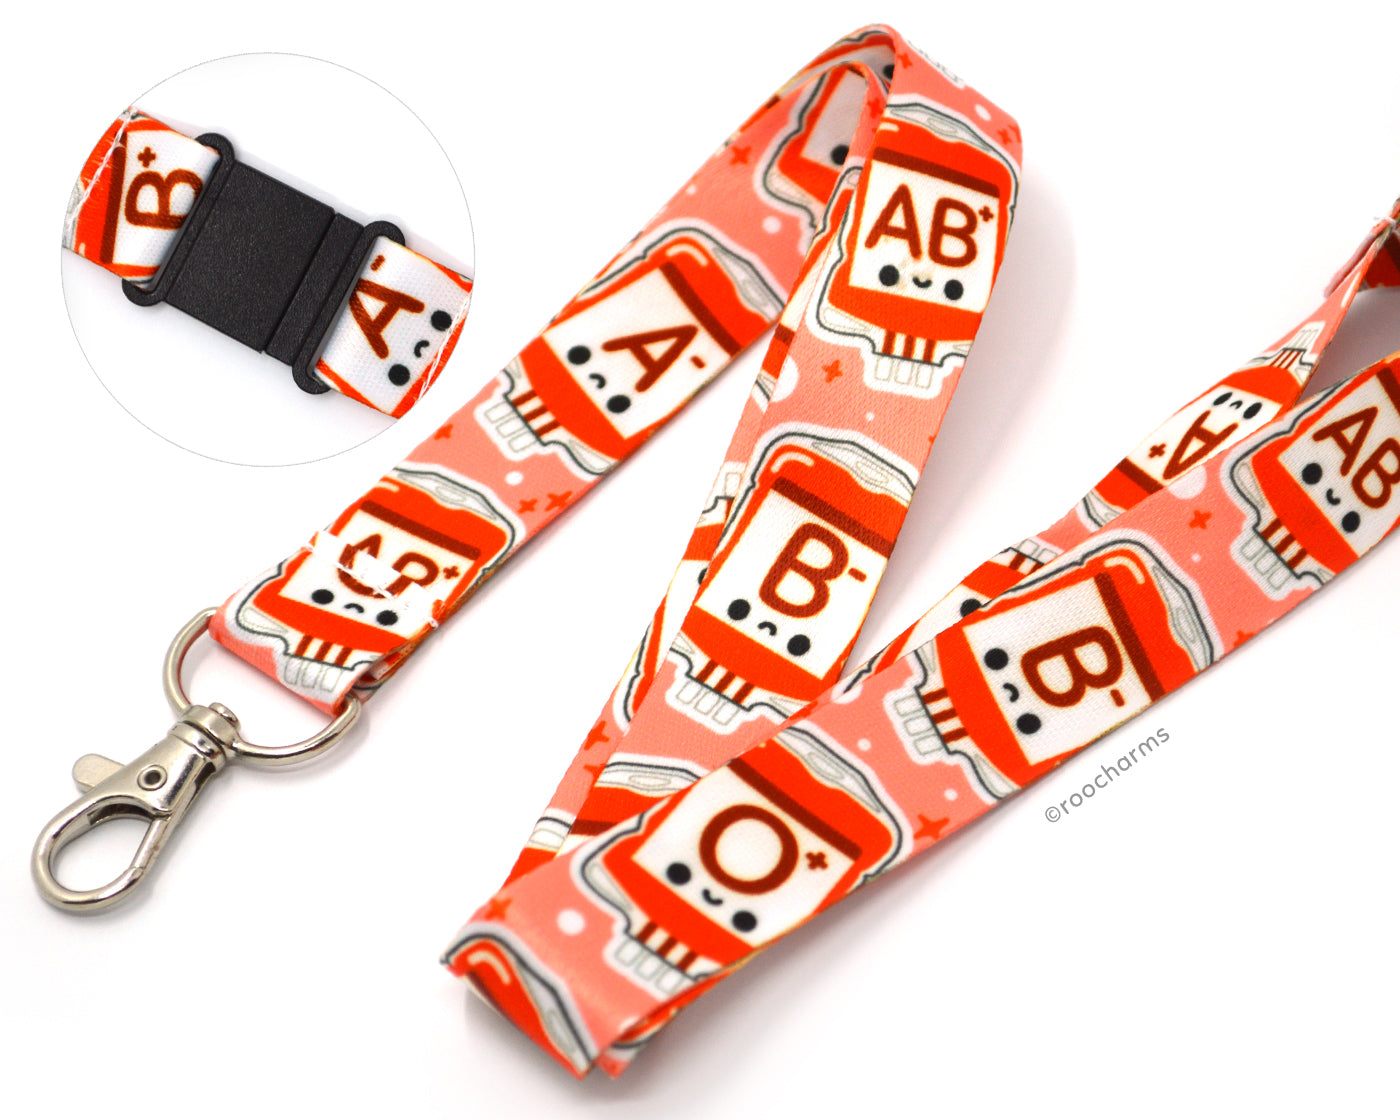 I'll Be Your Type Lanyard